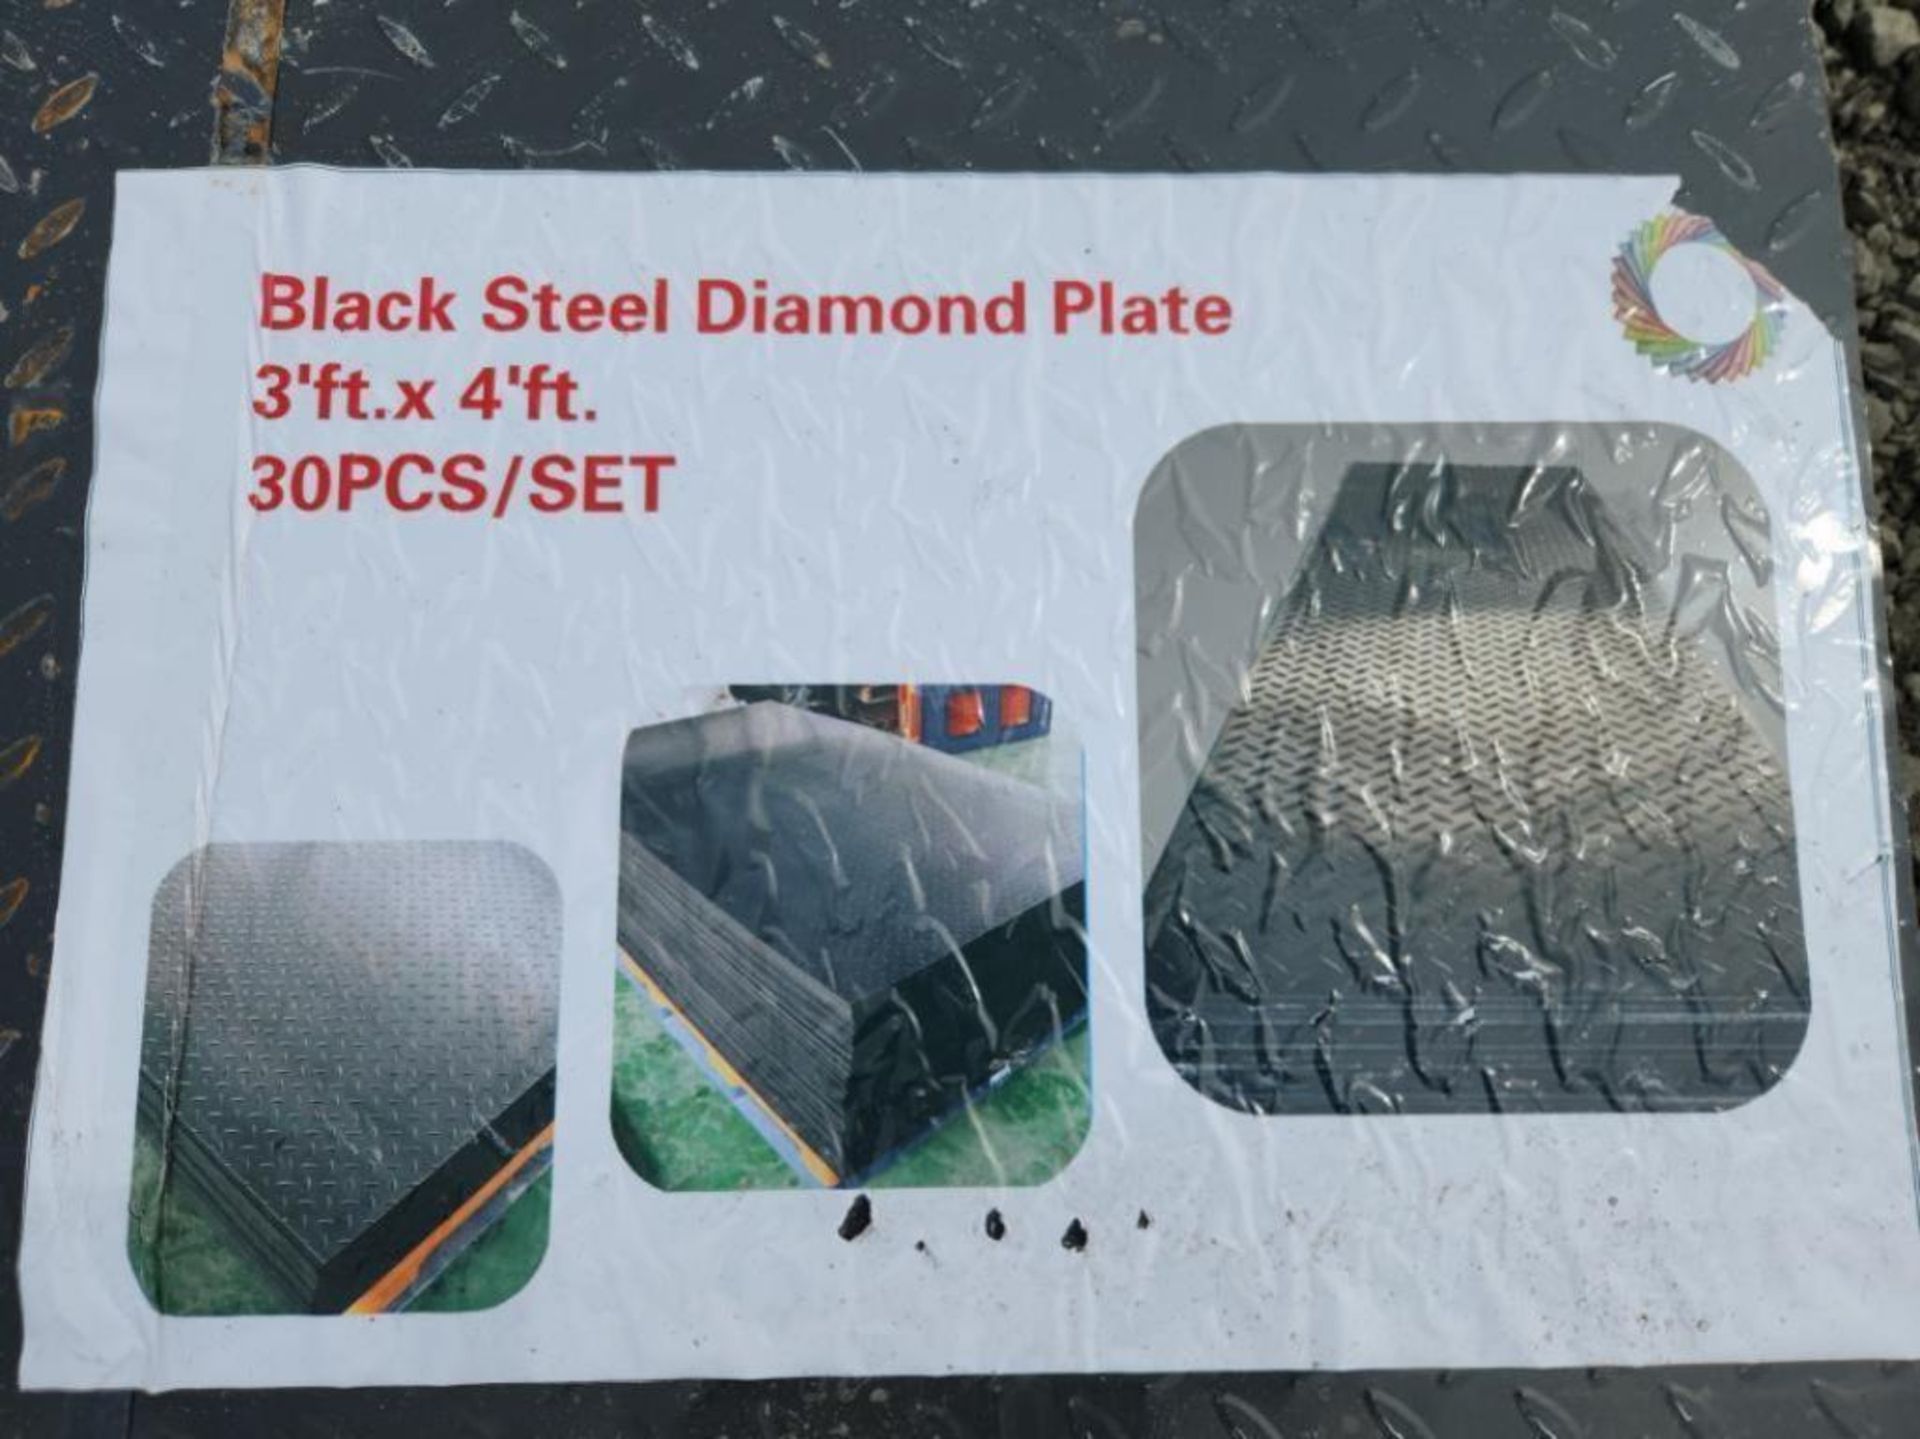 UNUSED STEEL DIAMOND PLATES , 30 PIECES, APPROX 3FT x 4FT ( PLEASE NOTE STOCK PHOTOS USED ) - Image 2 of 2